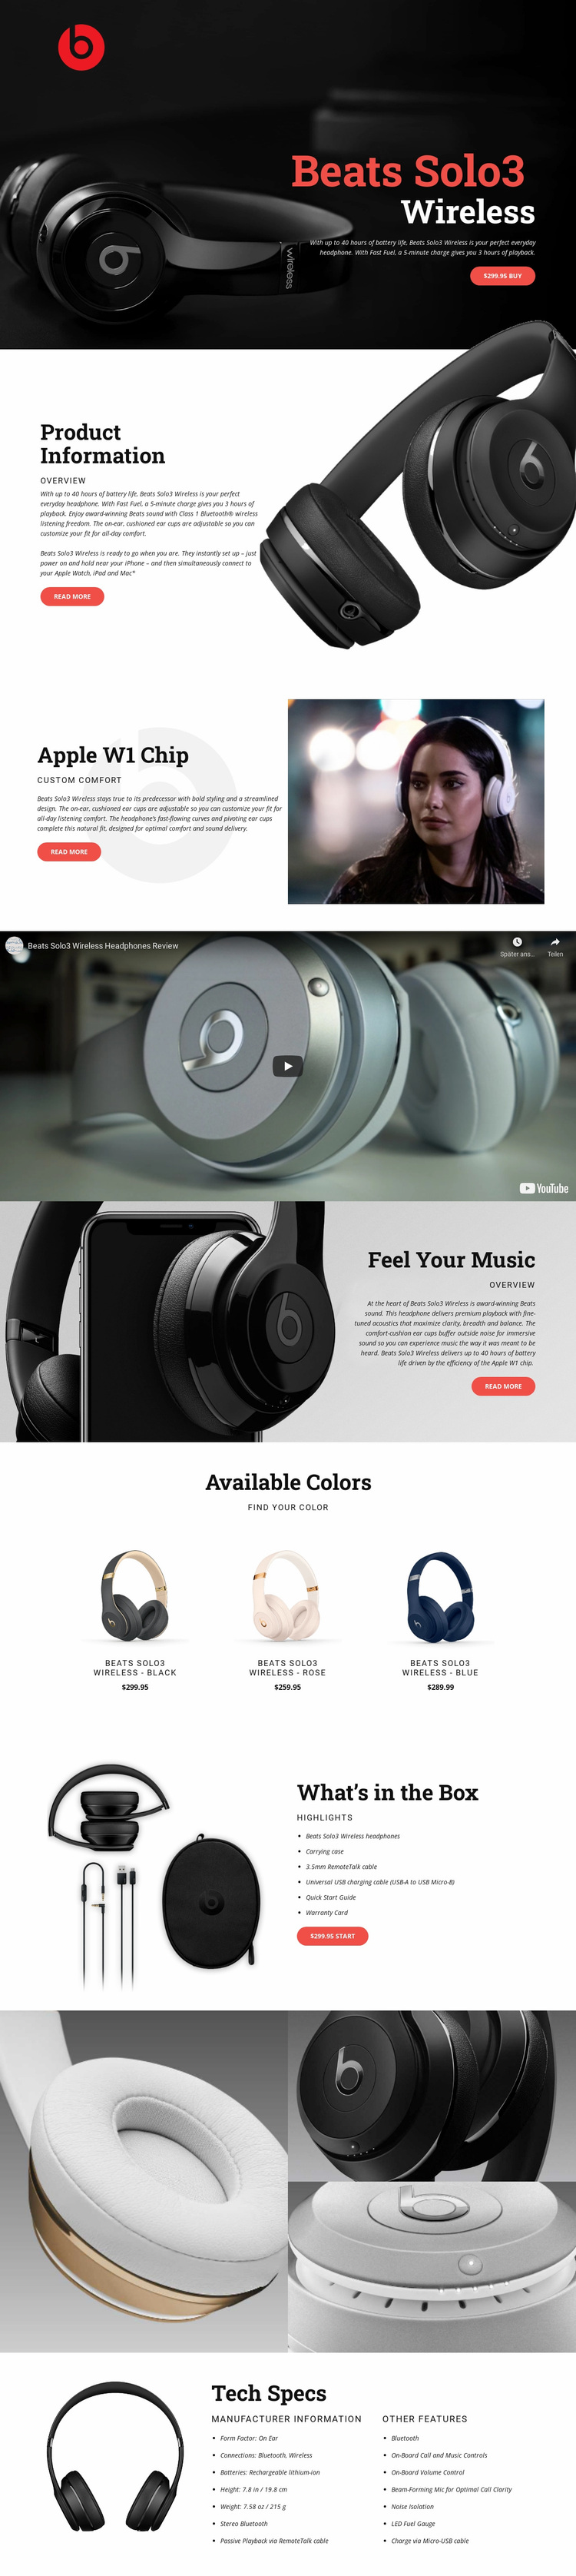 Outstanding quality of music Website Design